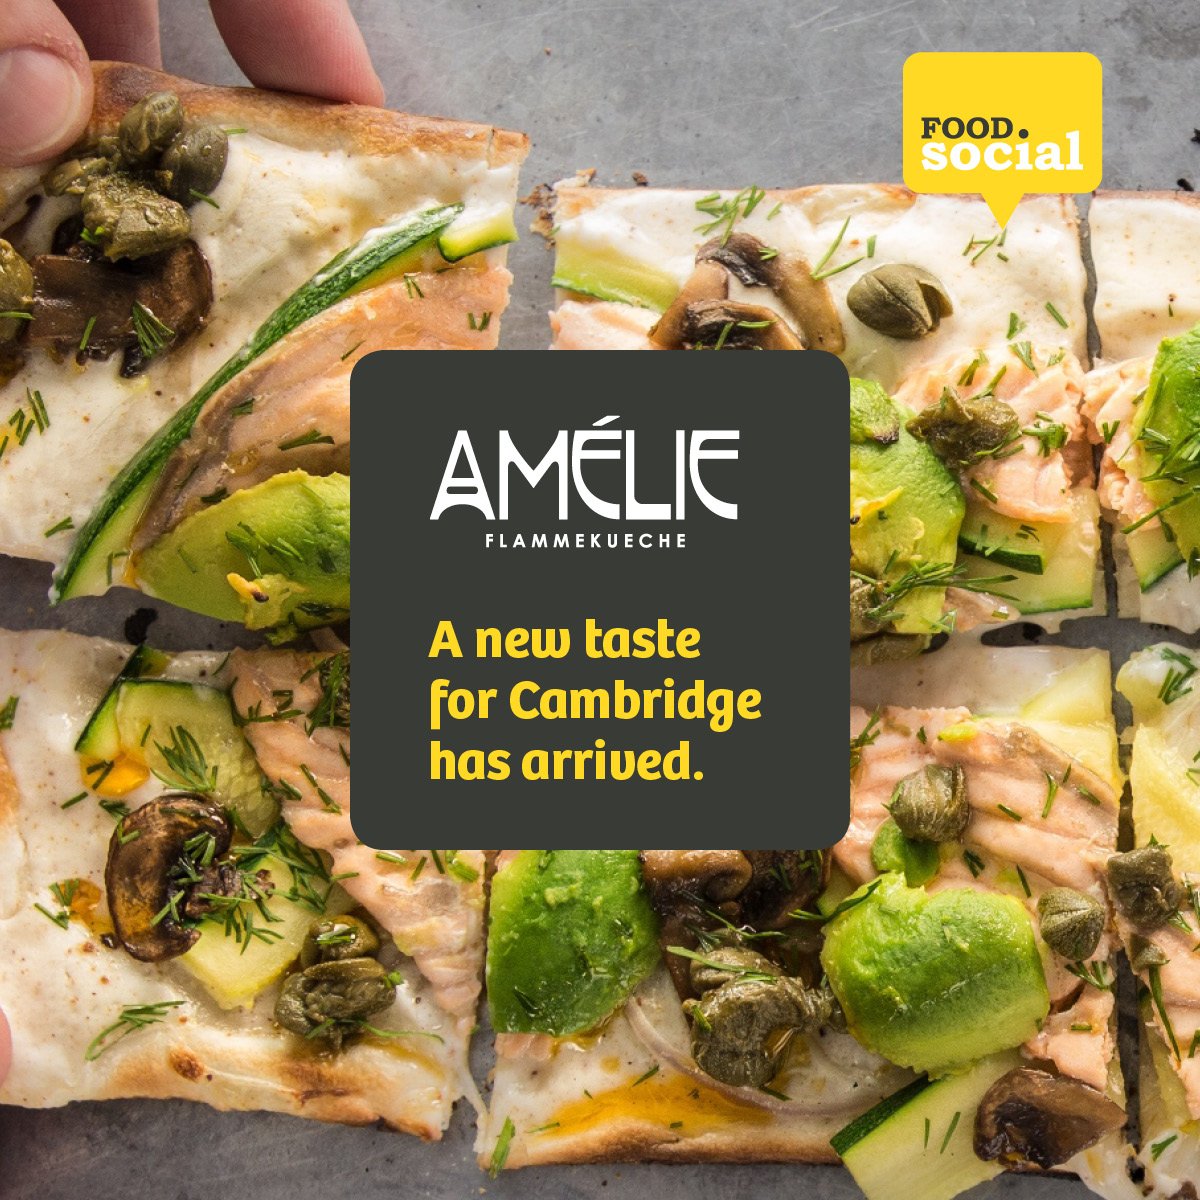 BIG NEWS! 💃 @Amelie_Rest is now OPEN! 😝😜😛 Enjoy 50% off all food from today until the 12th August! RT us if you'll be visiting!! 
_____

#TheGrafton #FoodSocial #TheGraftonFoodQuarter #Amelie #Flammekueche #Cambridge #CambridgeFood #RestaurantsInCambridge